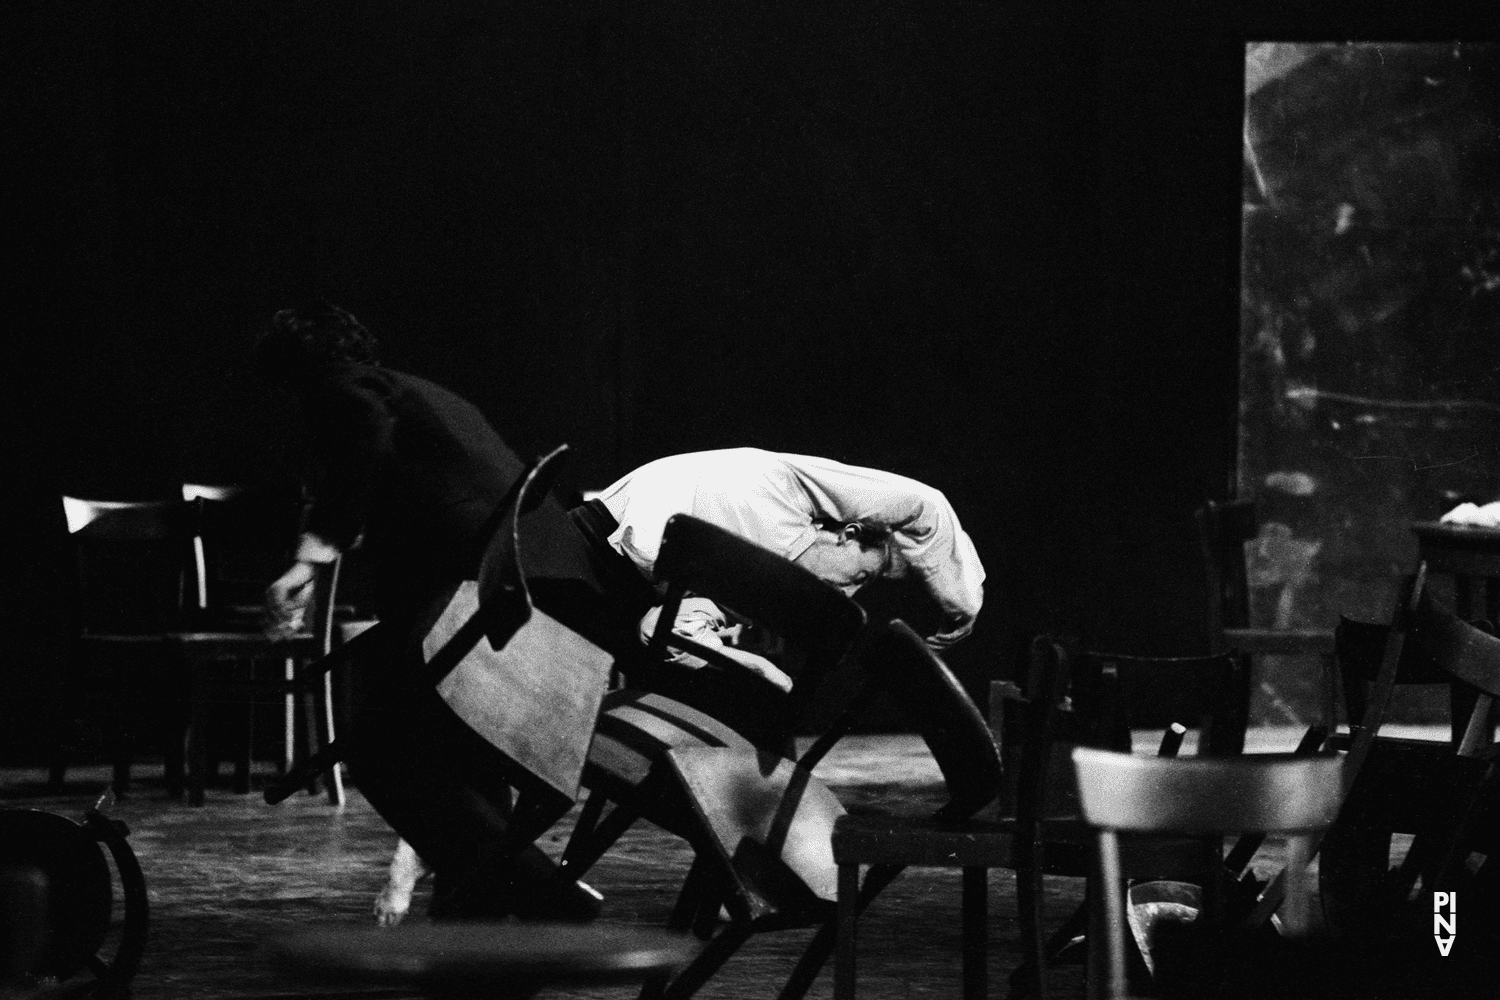 Dominique Mercy and Jean Laurent Sasportes in “Café Müller” by Pina Bausch